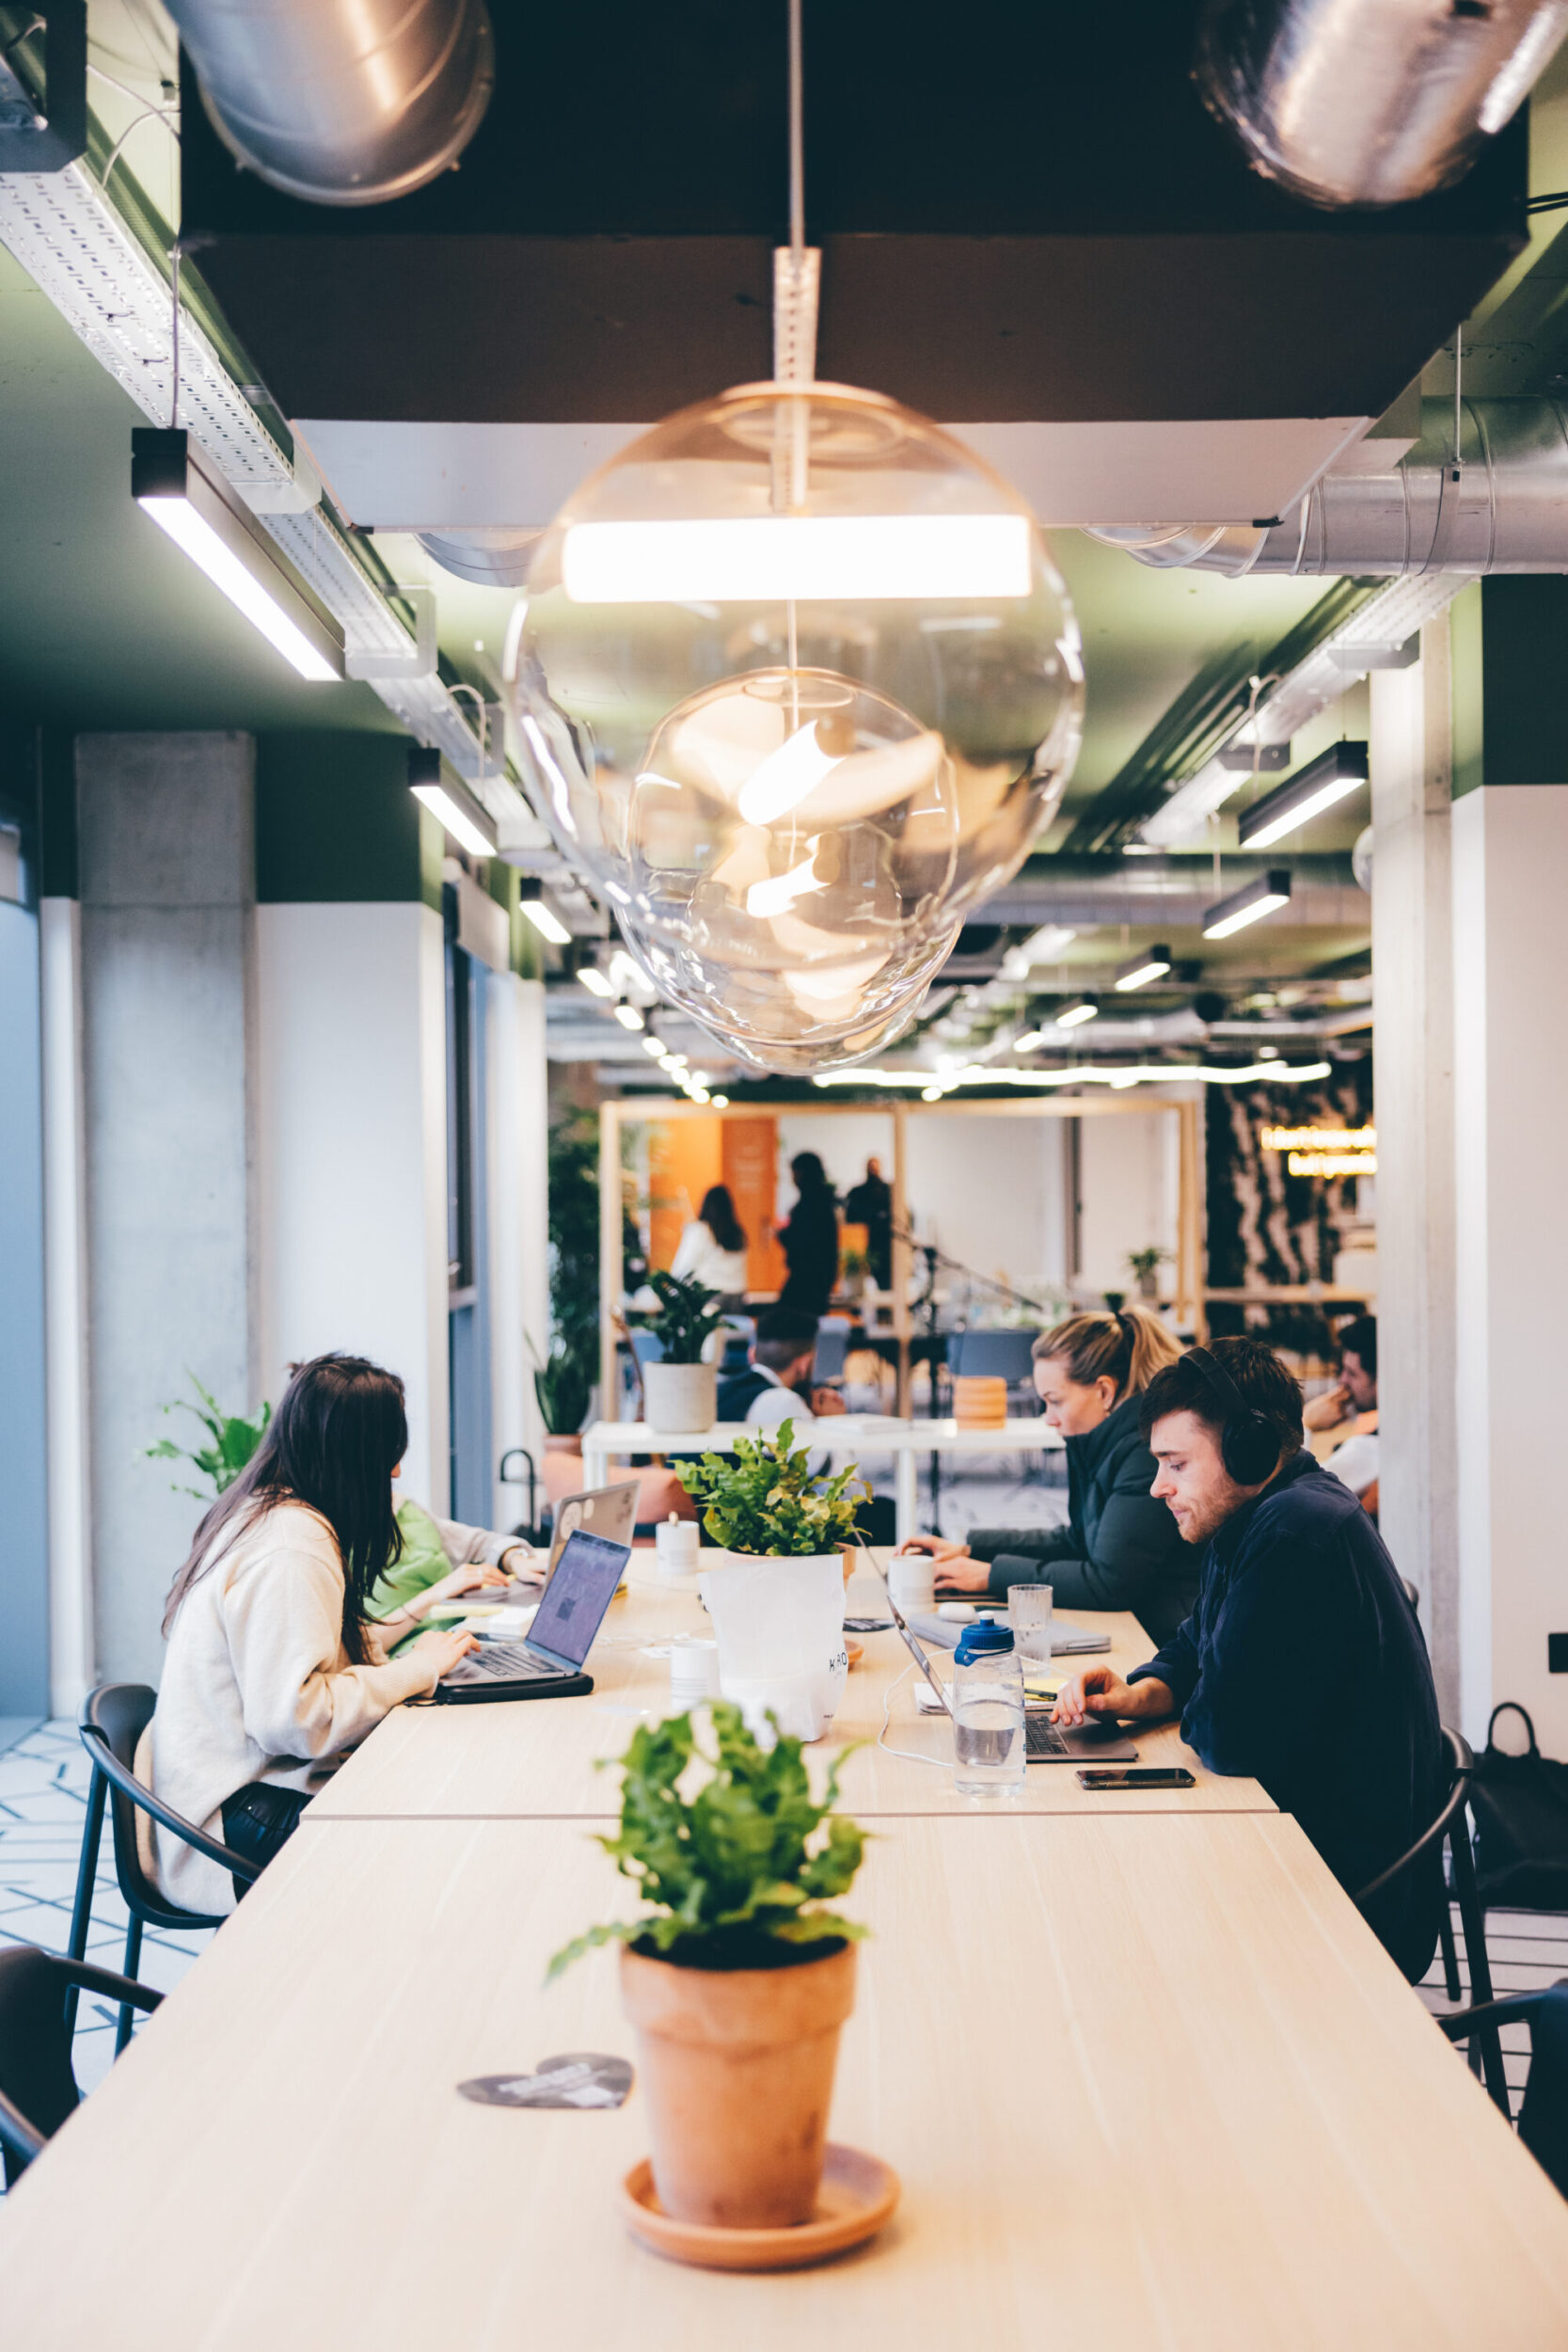 Spacemade offers flexible office space in vibrant coworking spaces across the UK.